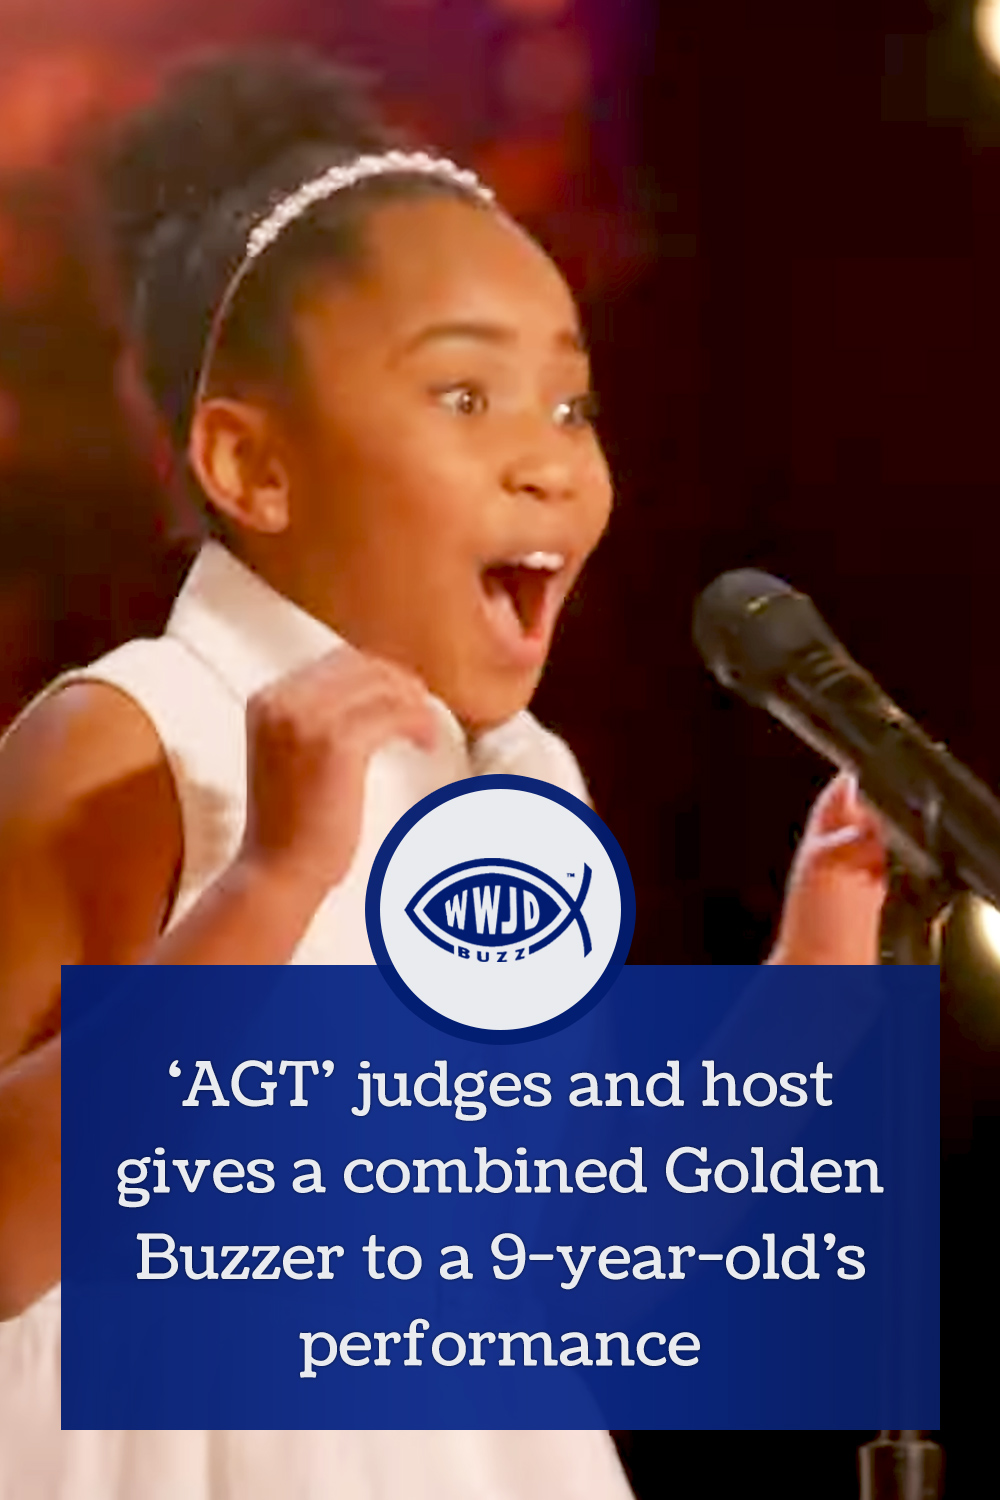 ‘AGT’ judges and host gives a combined Golden Buzzer to a 9-year-old’s performance